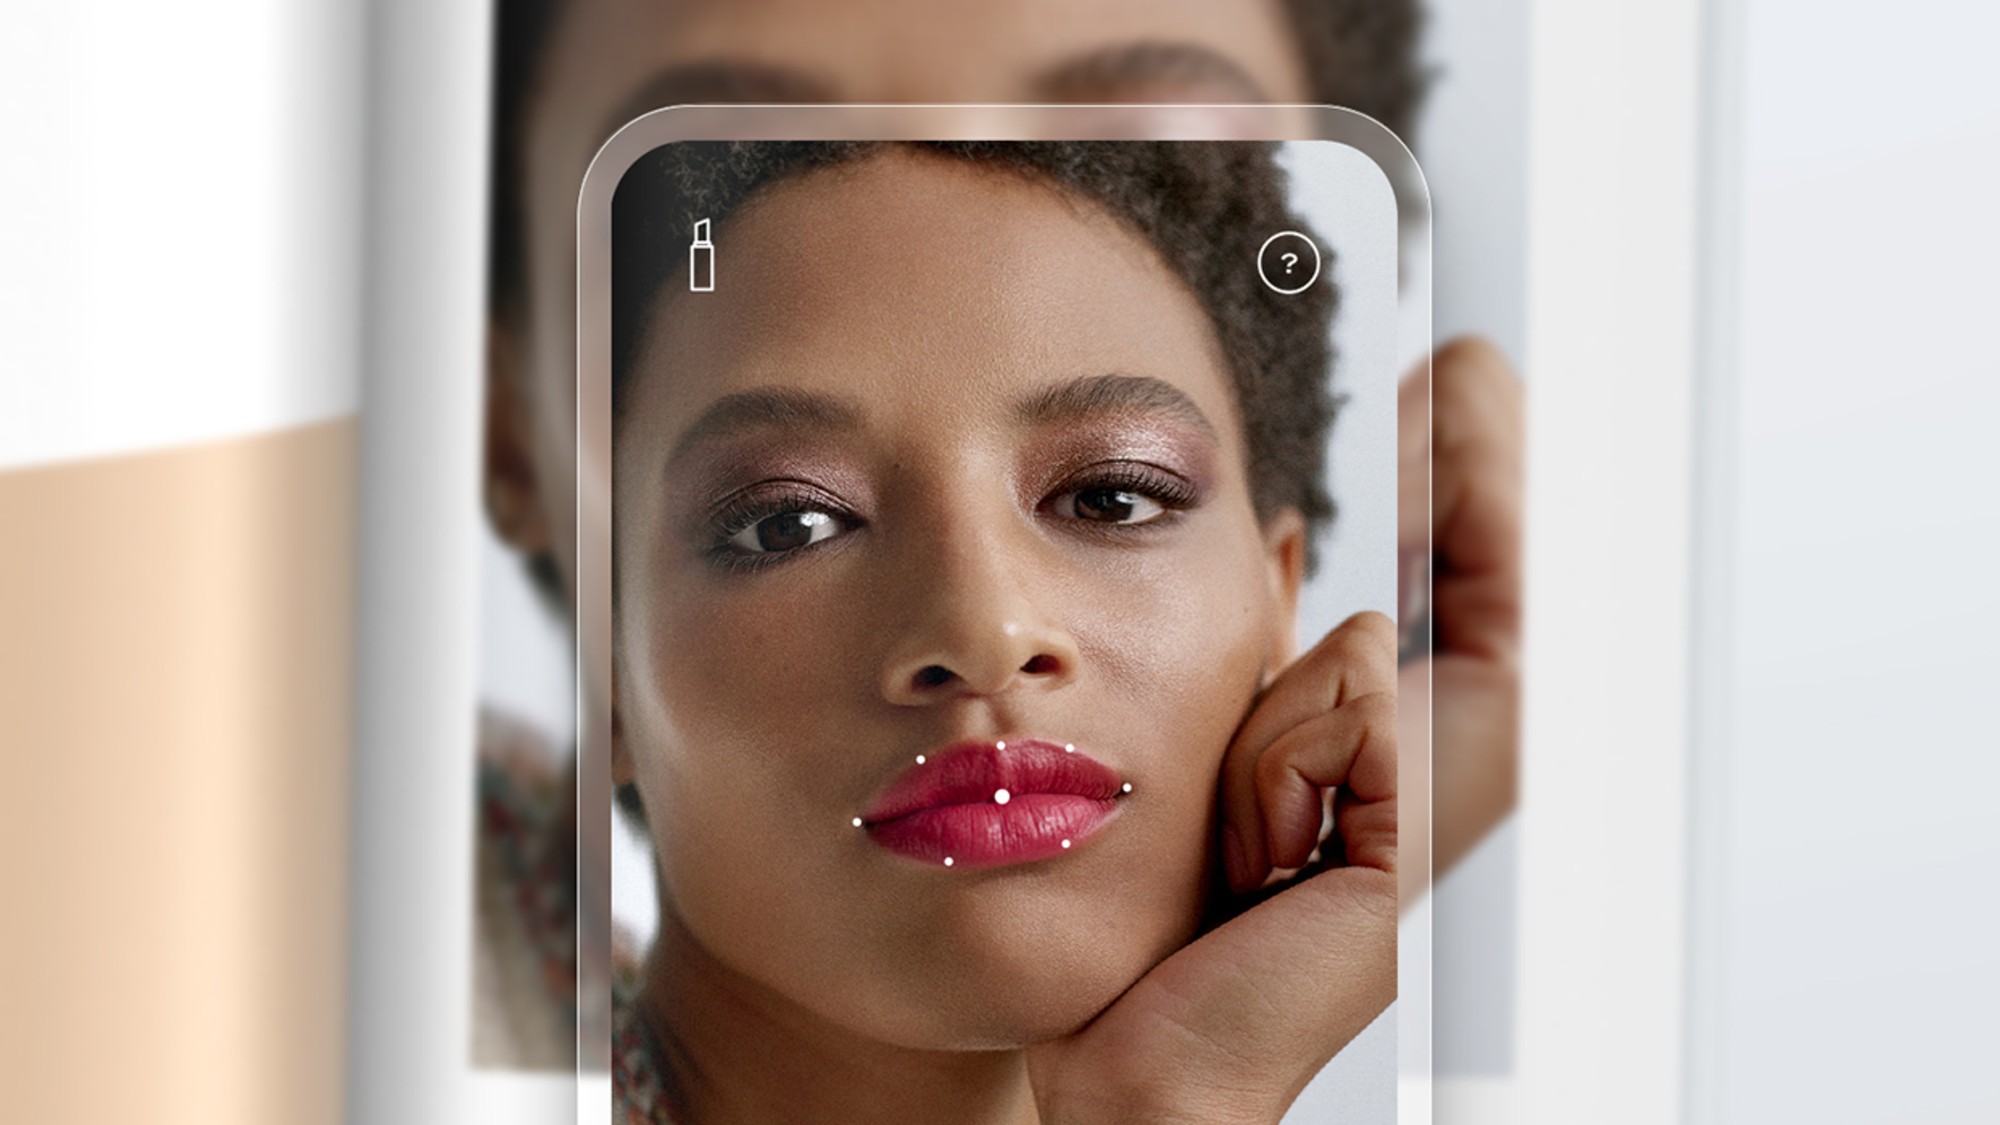 Looking for the perfect lipstick? The Chanel Lipscanner app finds it for you